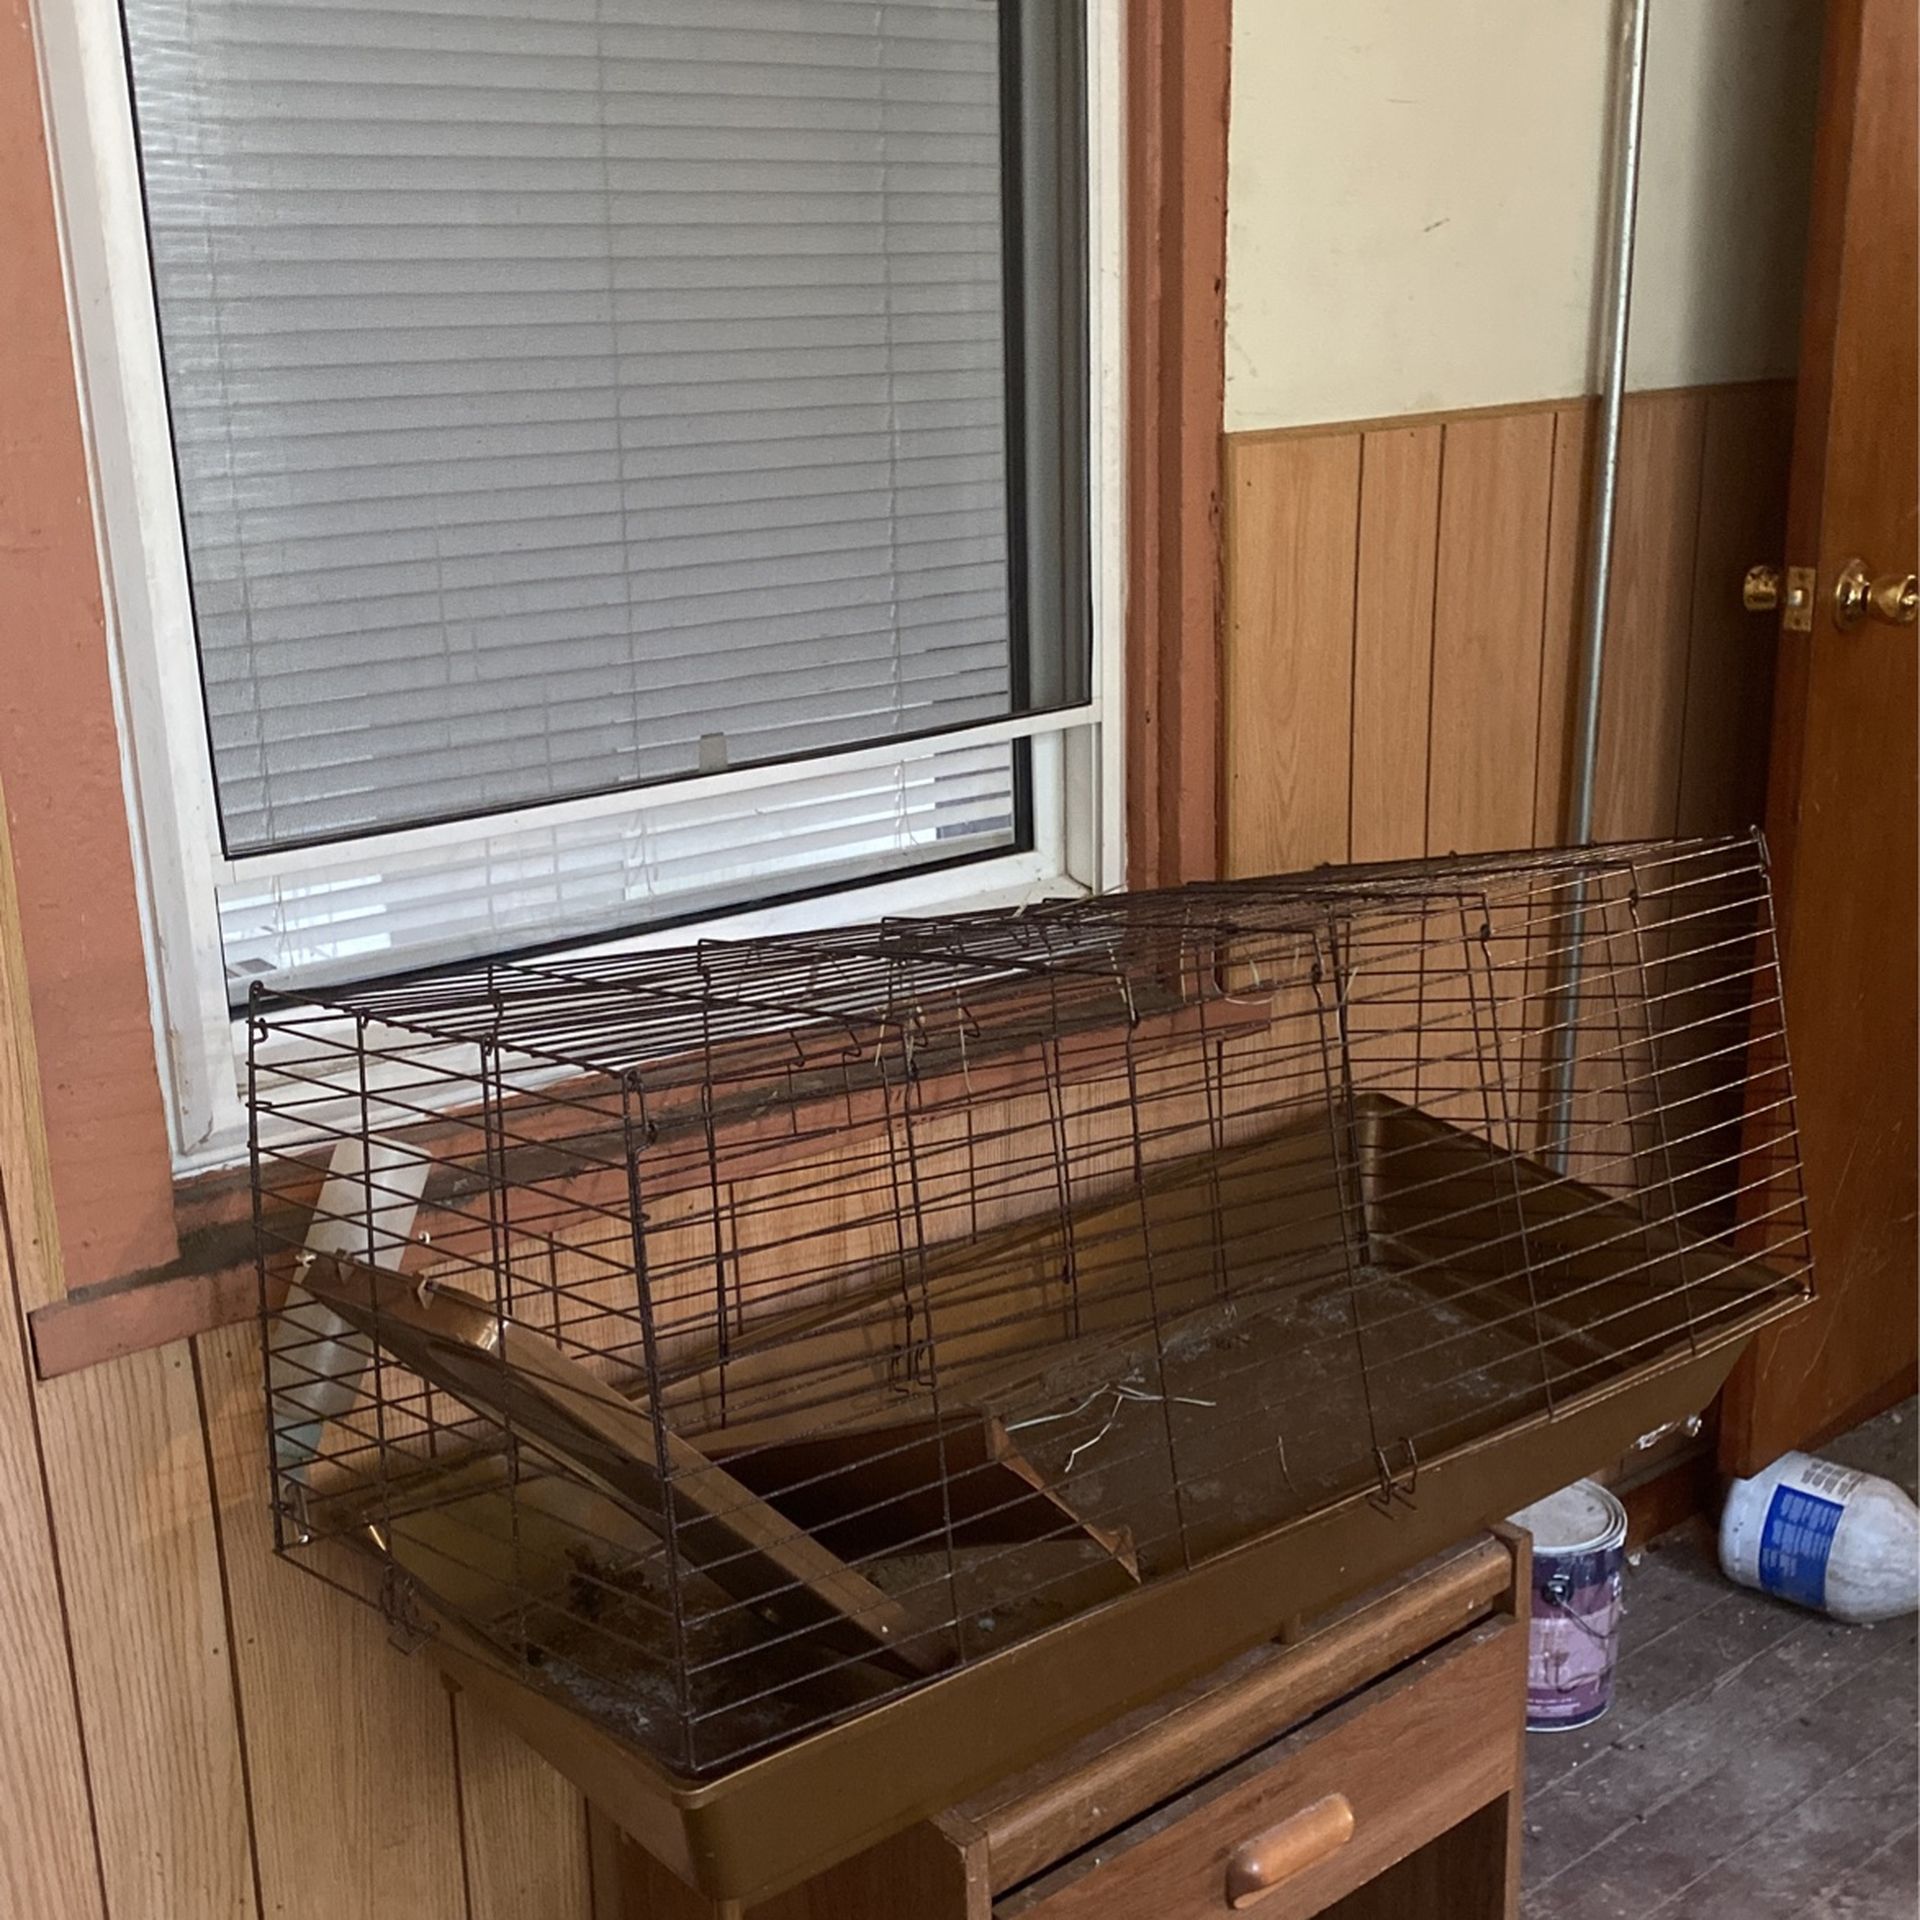 Guinea pig Or Rabbit Cage 